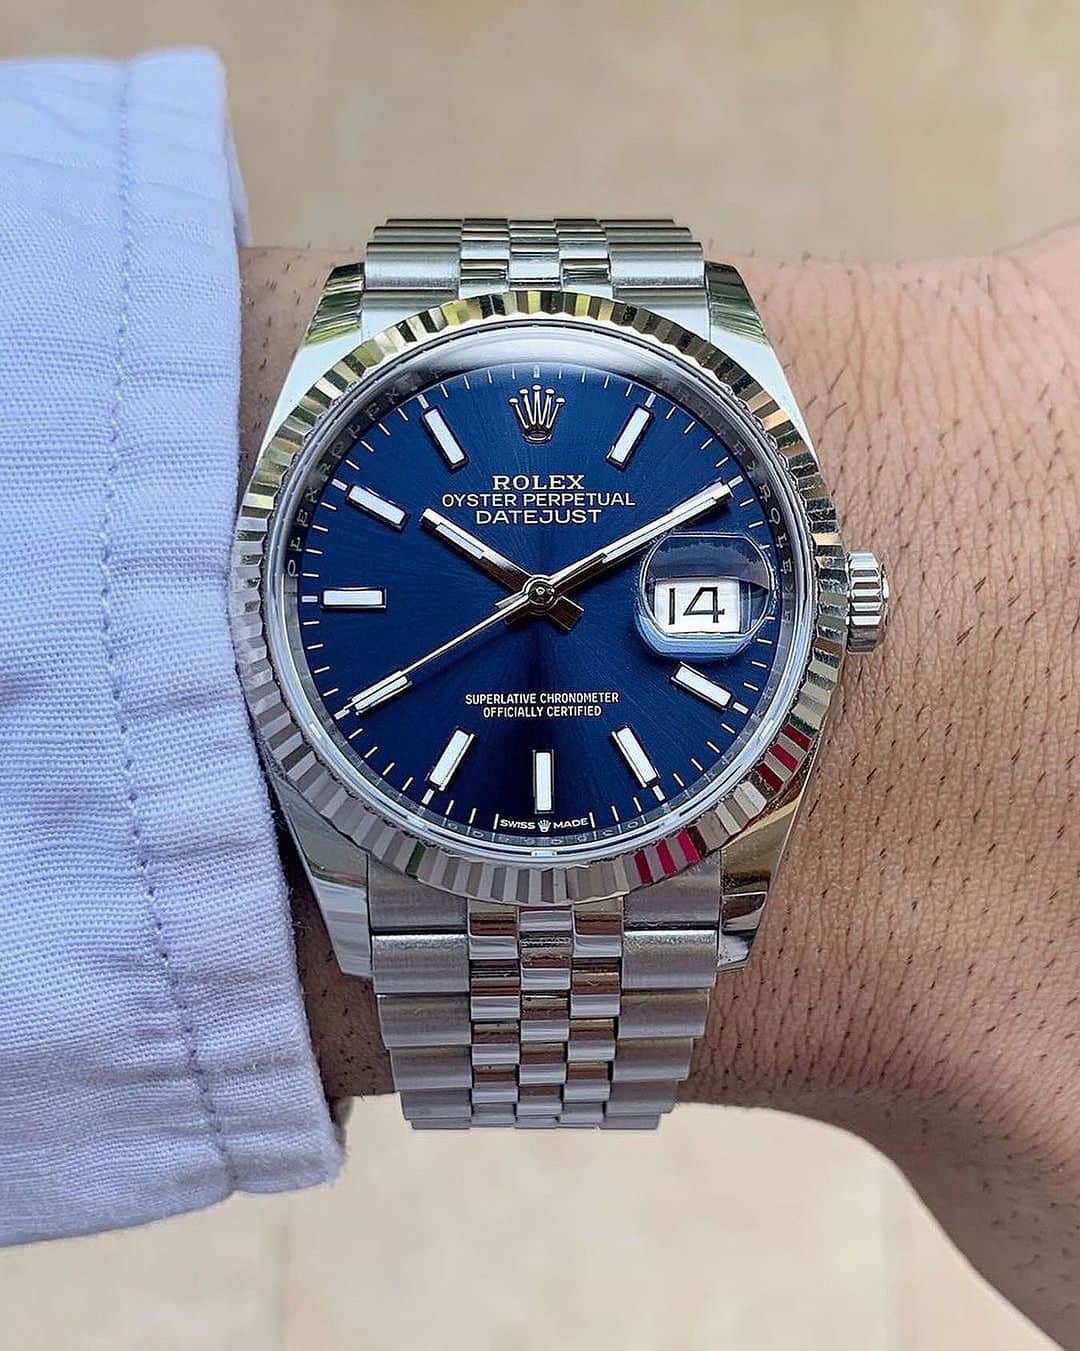 Daily Watchのインスタグラム：「Wristshot with the Rolex Datejust Ref 126234. Stunning blue dial and jubilee bracelet. Photo by @arrested_time」